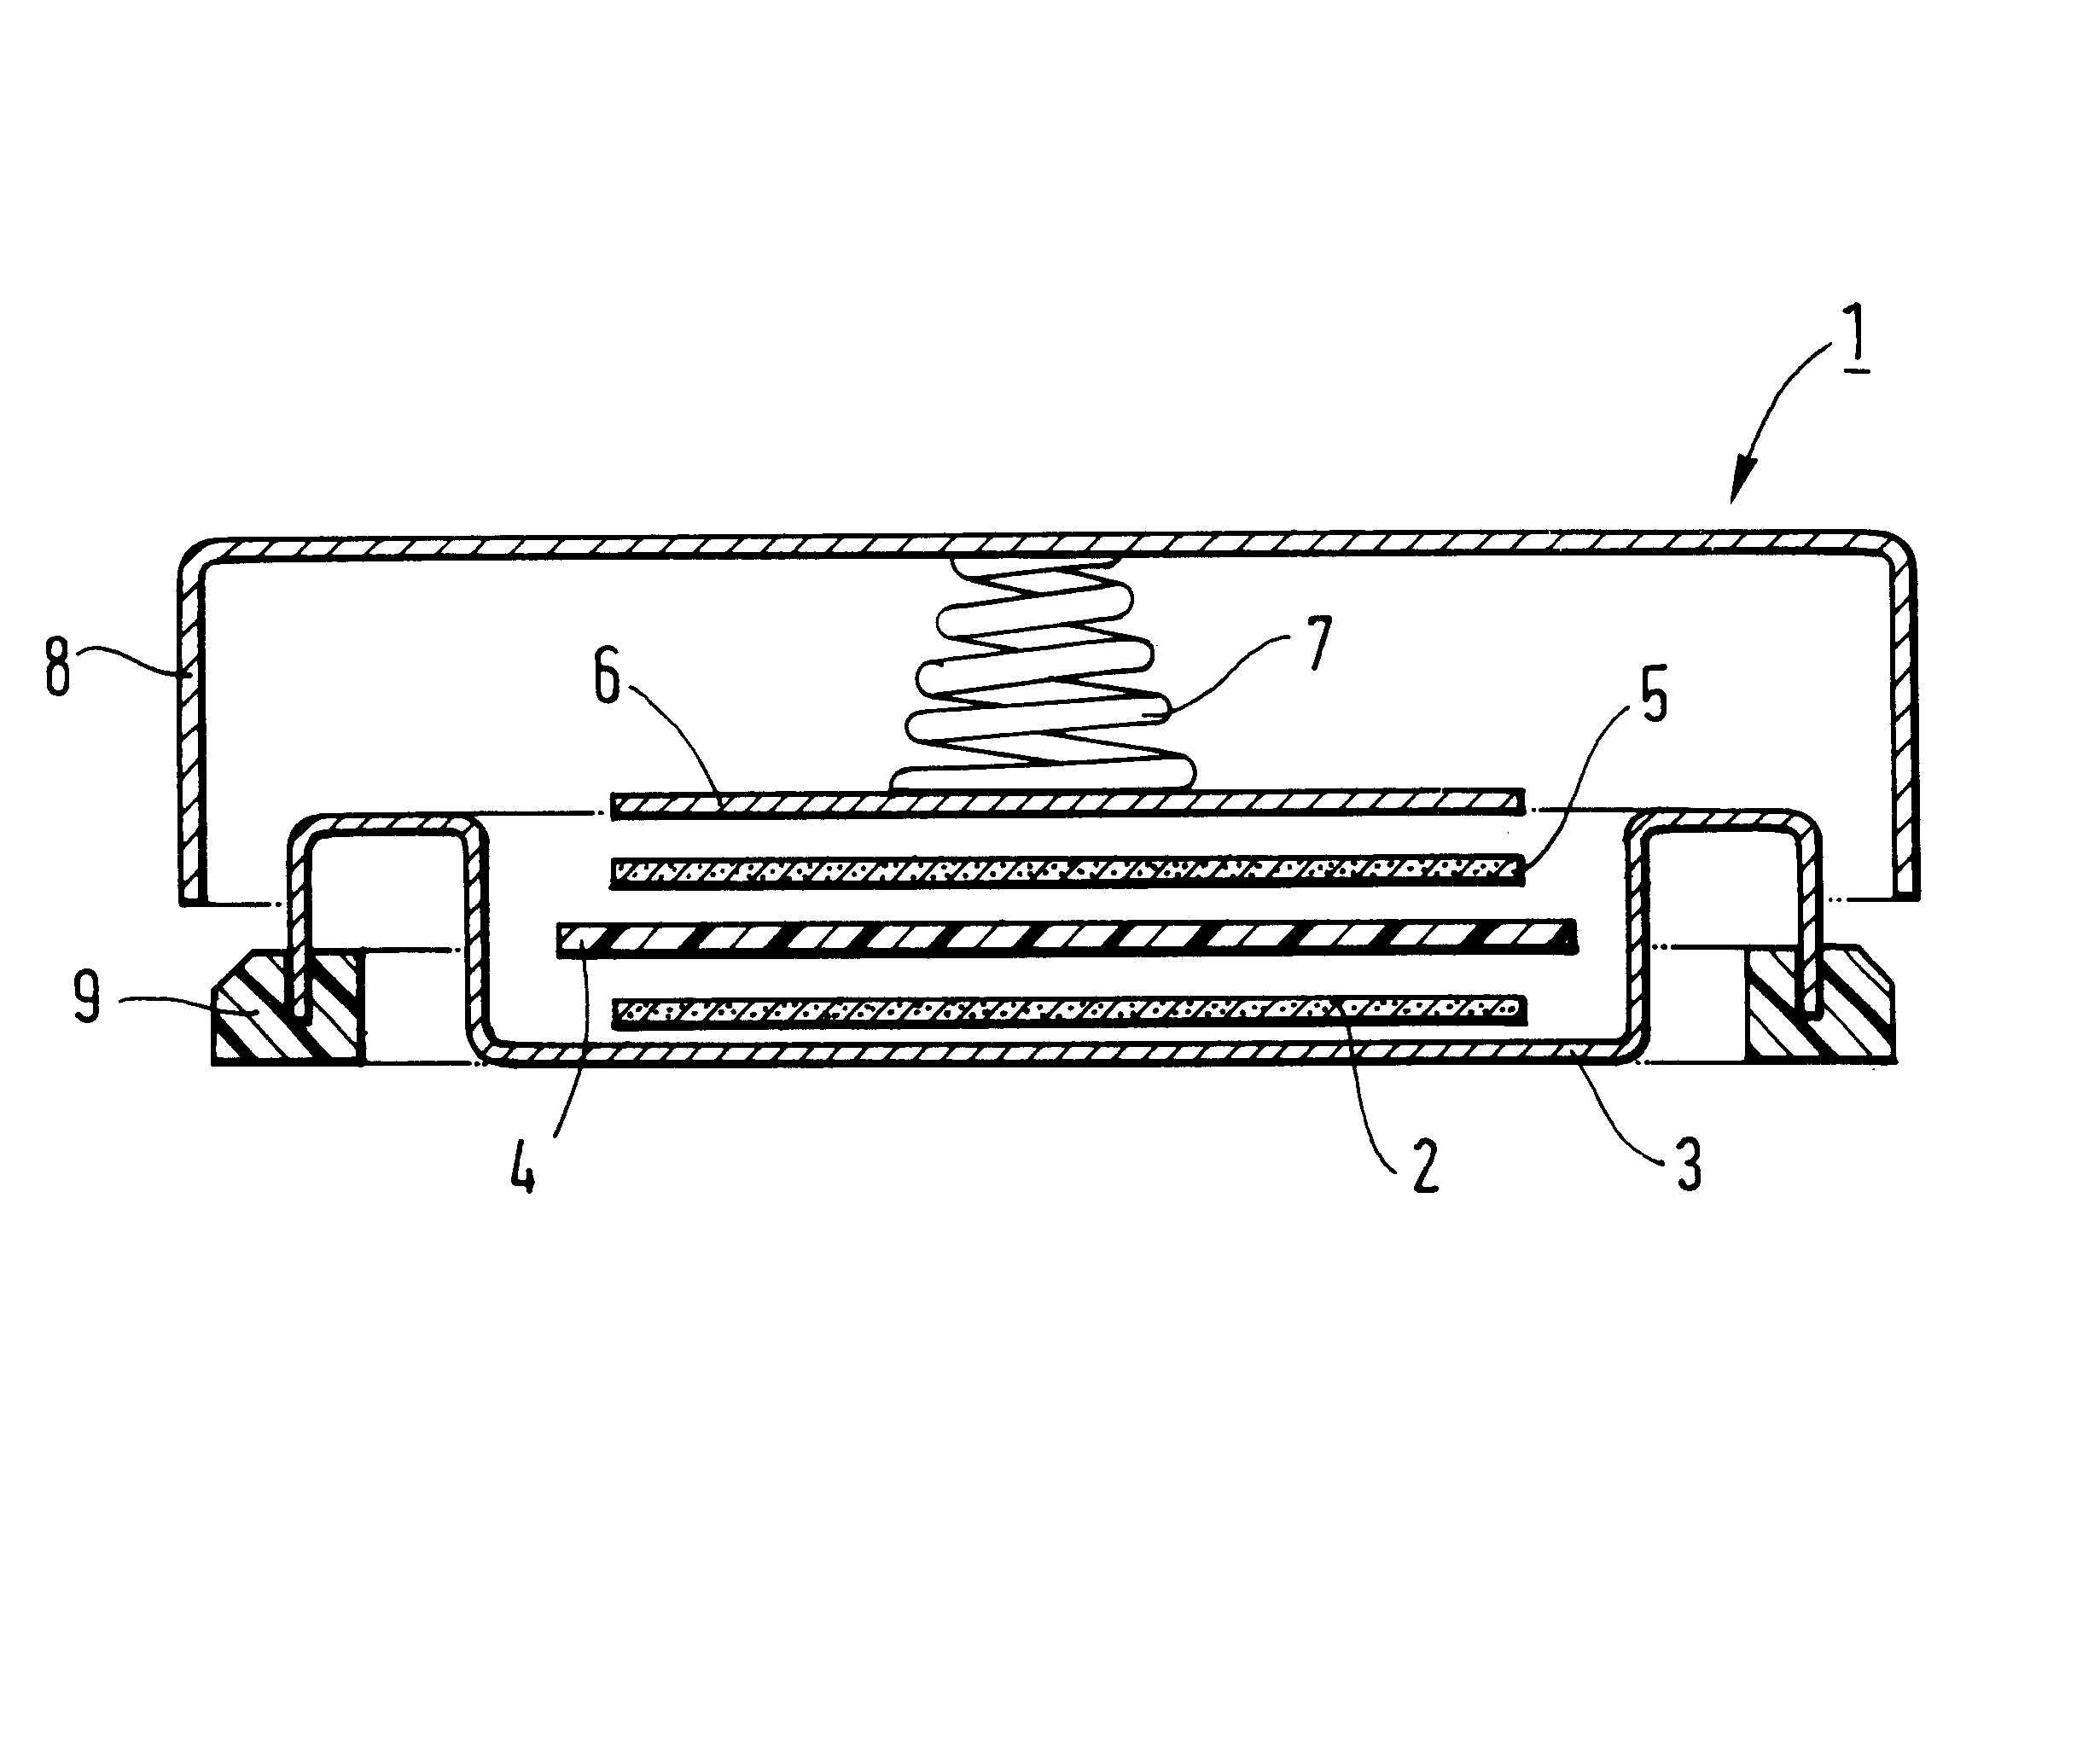 Positive electrode for a lithium rechargeable electro-chemical cell having an aluminum current collector